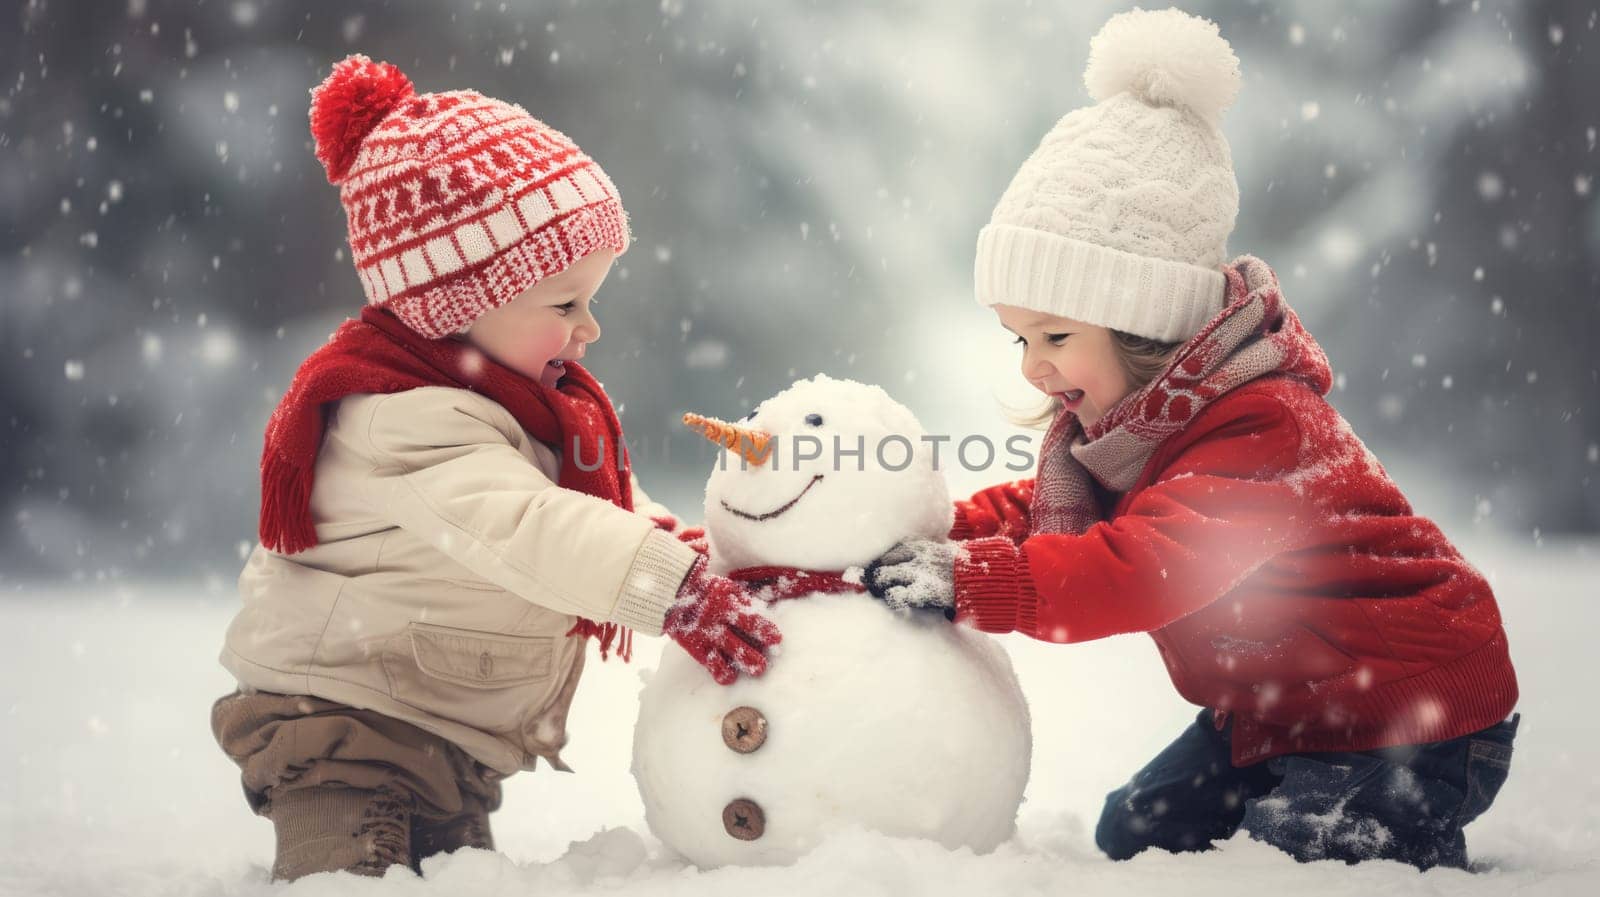 Kids building snow man playing outdoors on sunny snowy winter day. Outdoor family fun on Christmas vacation